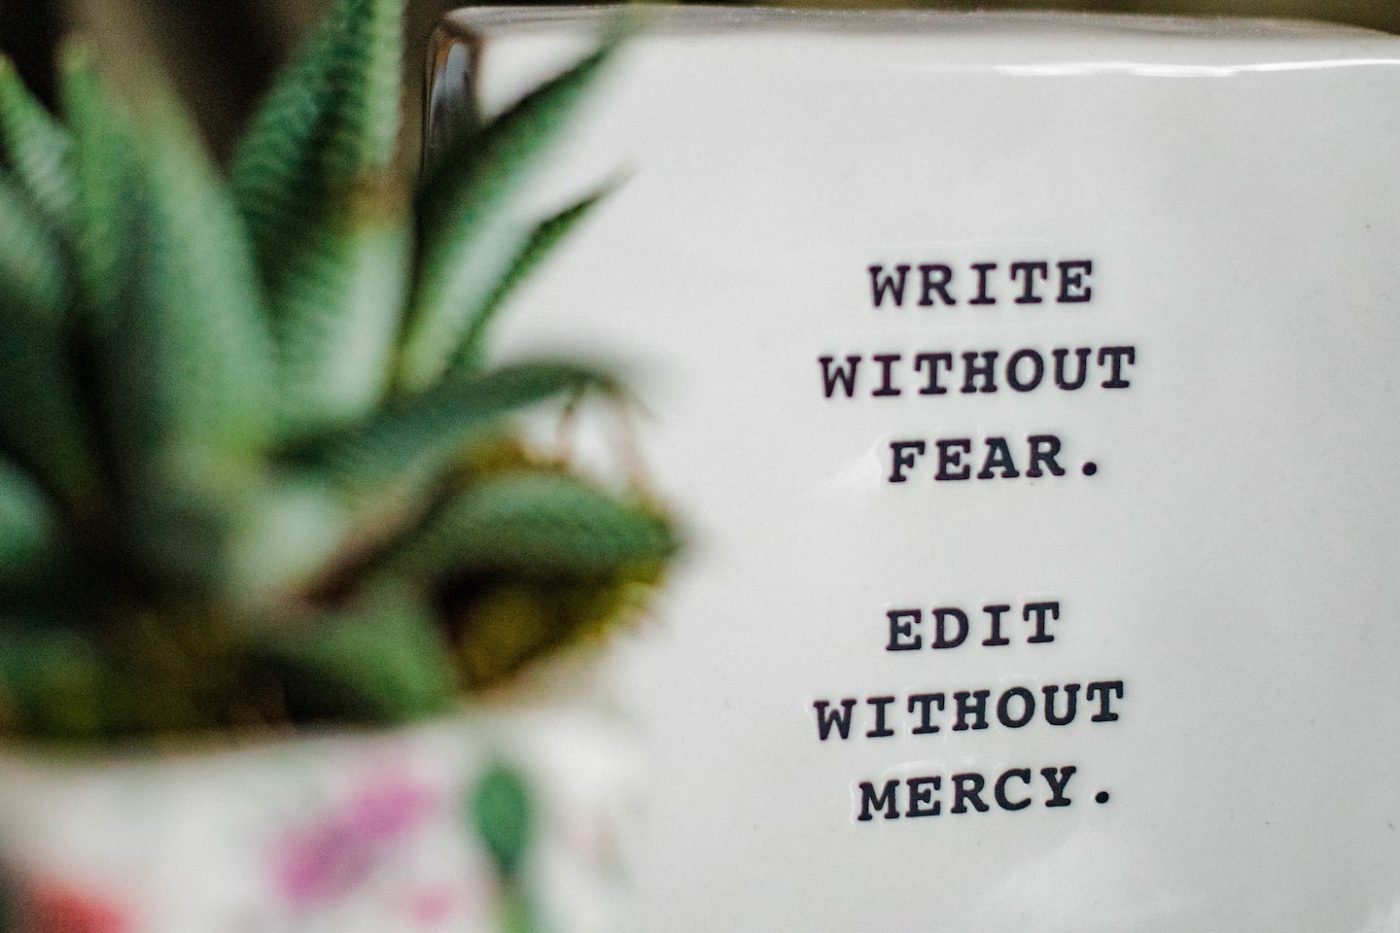 white tile that says write without fear, edit without mercy.